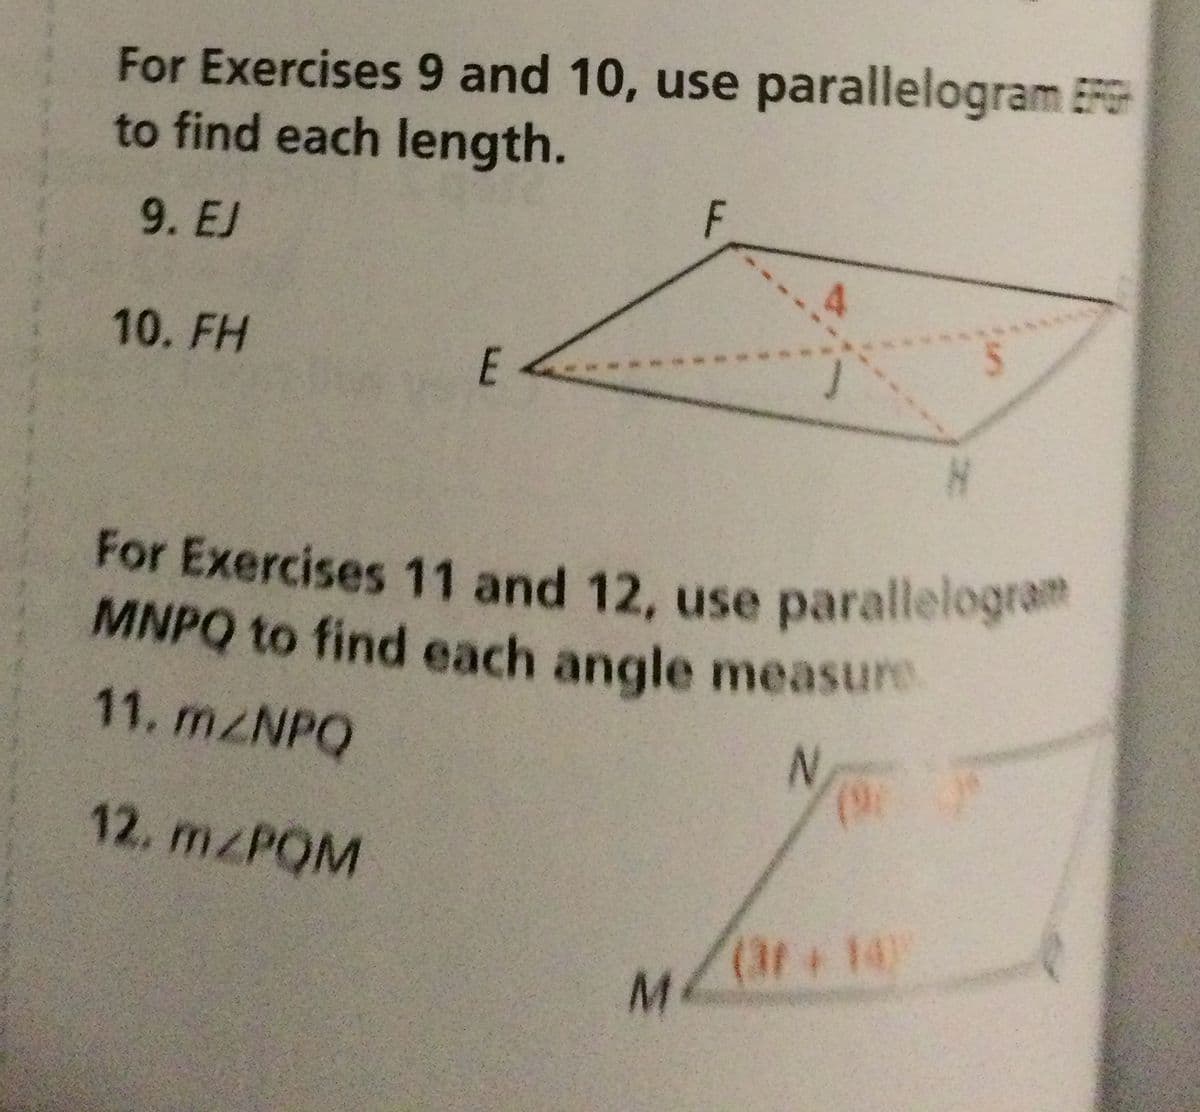 For Exercises 11 and 12, use parallelogram
MNPQ to find each angle measure
For Exercises 9 and 10, use parallelogram EFGH
to find each length.
F.
9. EJ
10. FH
E
For Exercises 11 and 12, use parallelogra
MNPQ to find each angle measure
11. M/NPQ
12. mzPQM
(3t+ 14
